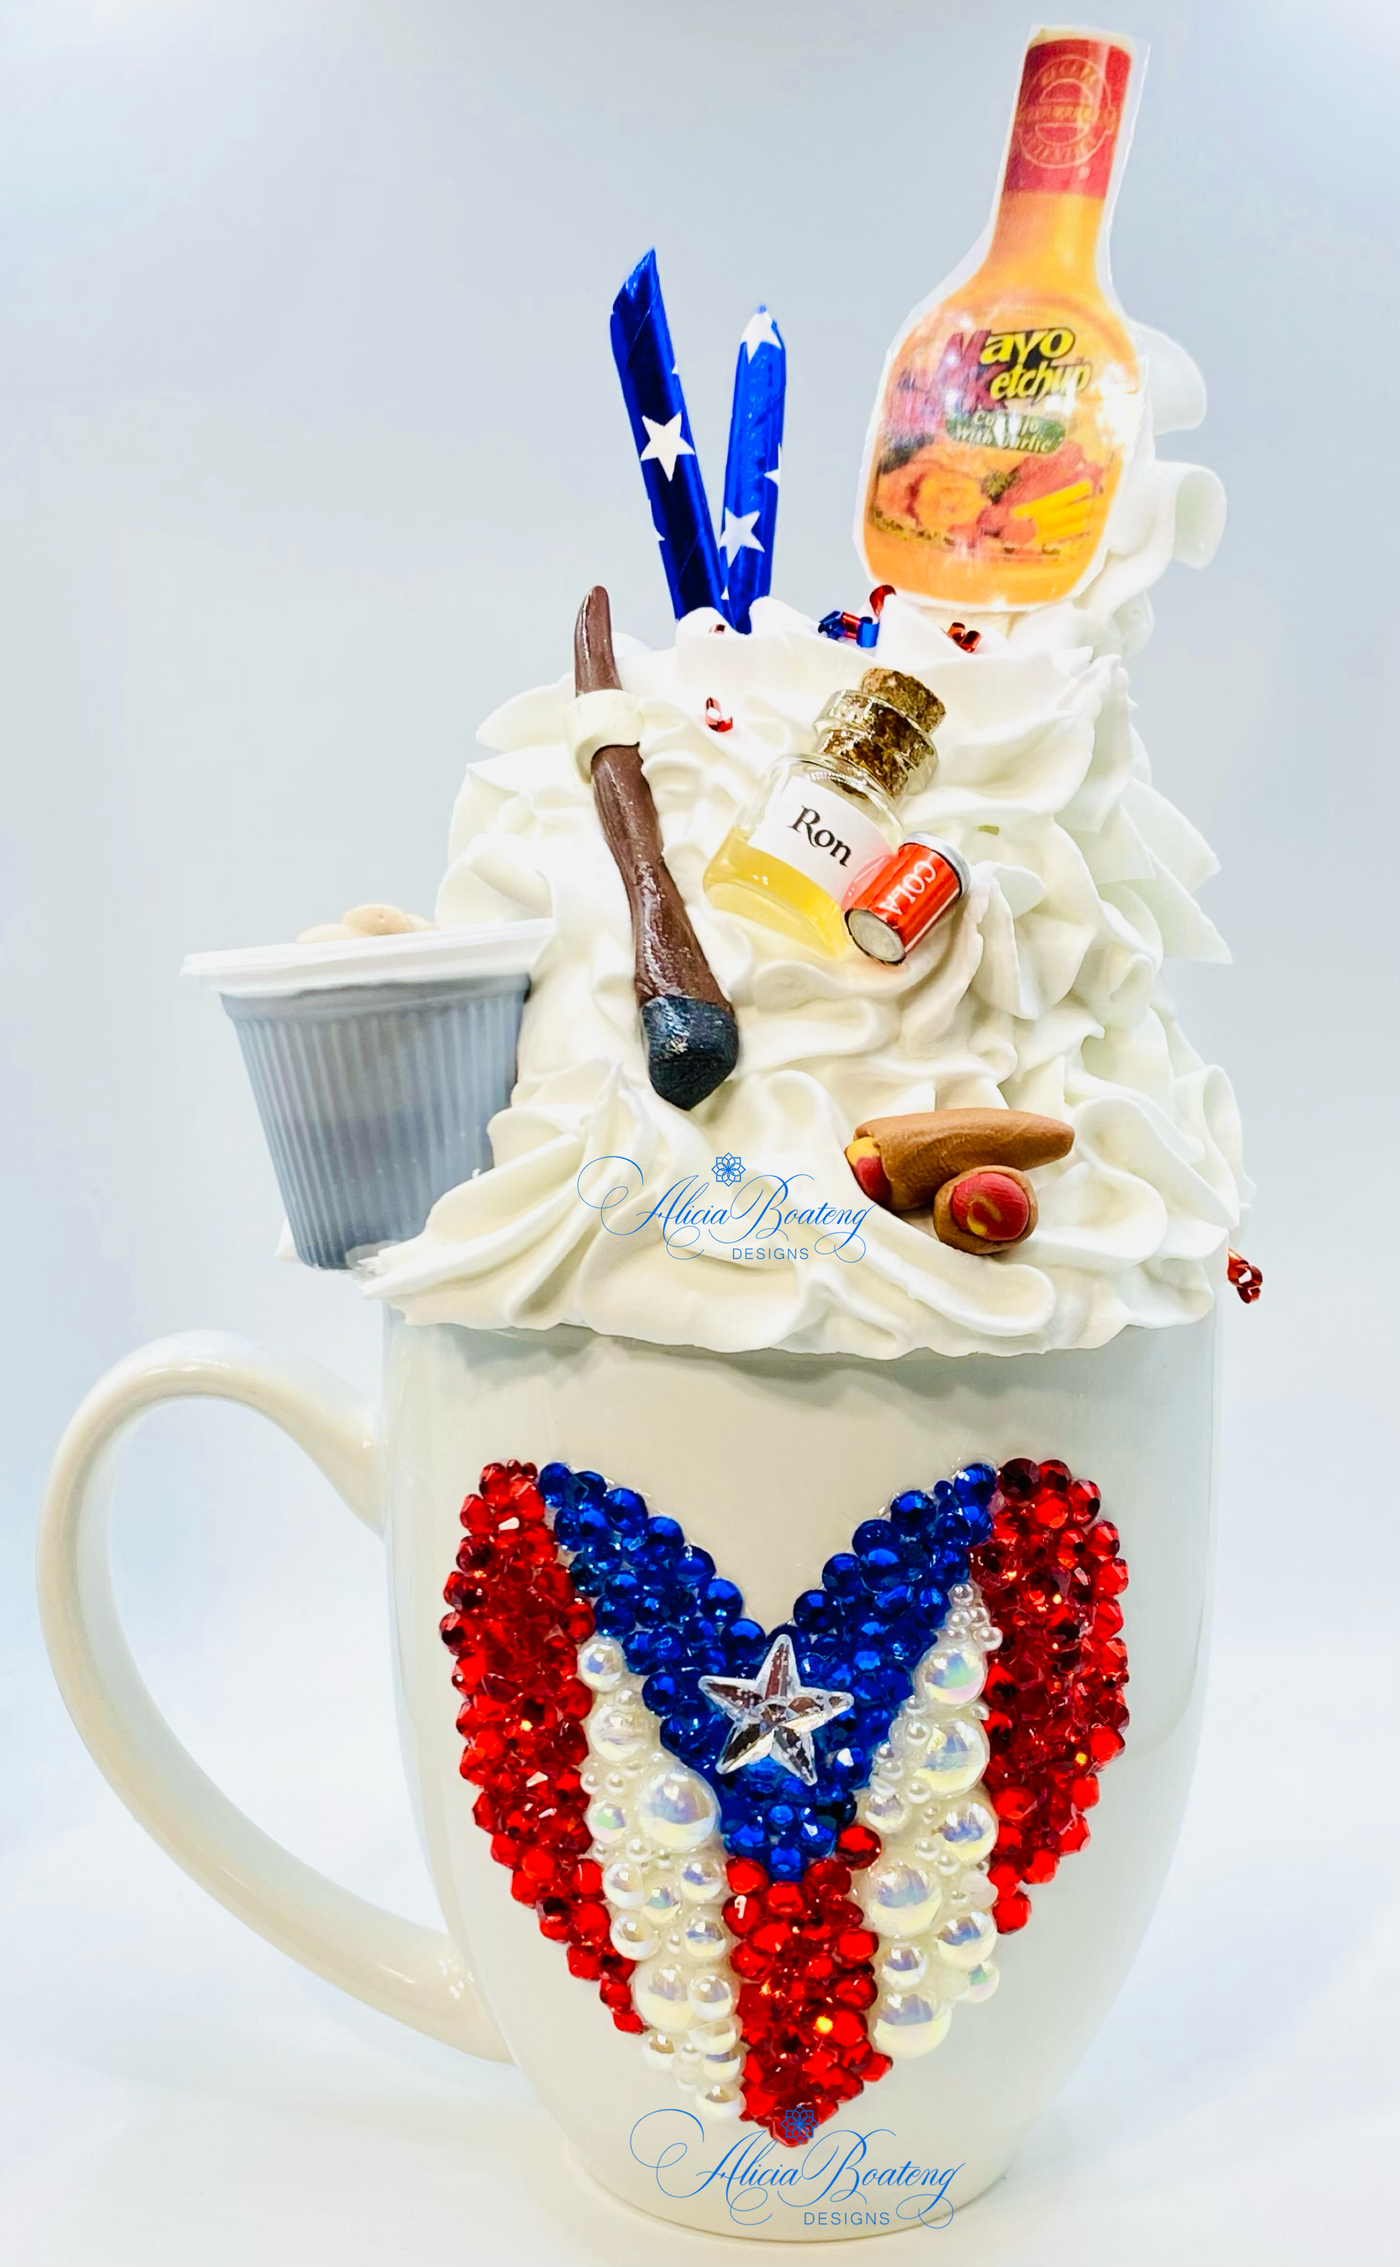 alicia boateng designs created a cup puerto rican flag with stones and pearls. show your spirit with this coffee or tea cup. it inclydes a topper with cafecito, ron y alcapurrias